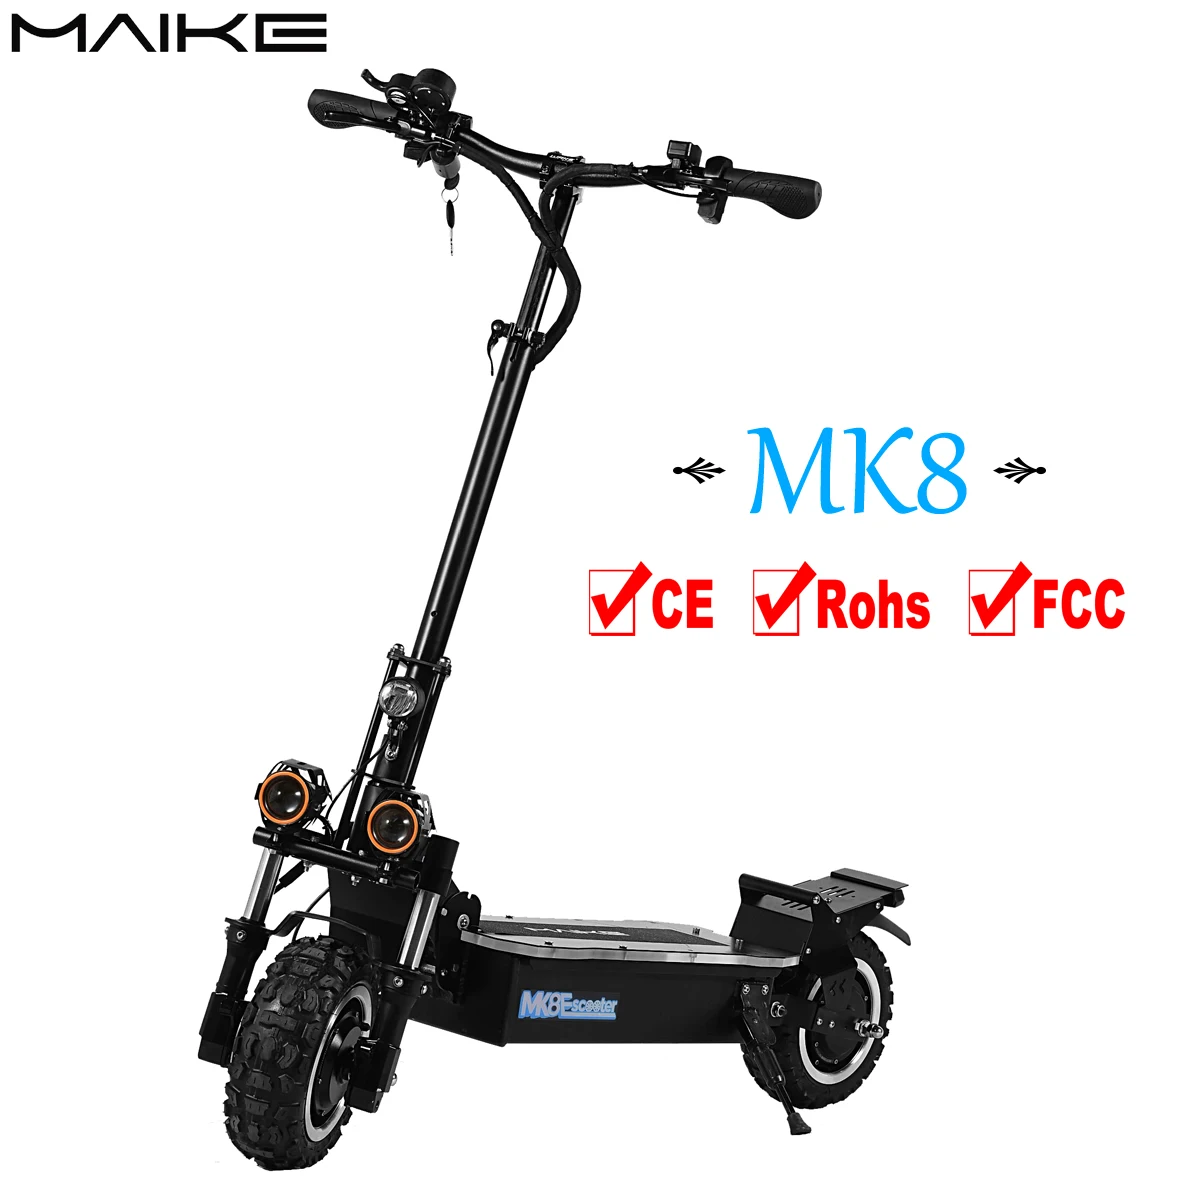 

Hot maike mk8 11 inch e scooter 5000w dual motor high speed 80km/h fast off road scooter electric adults